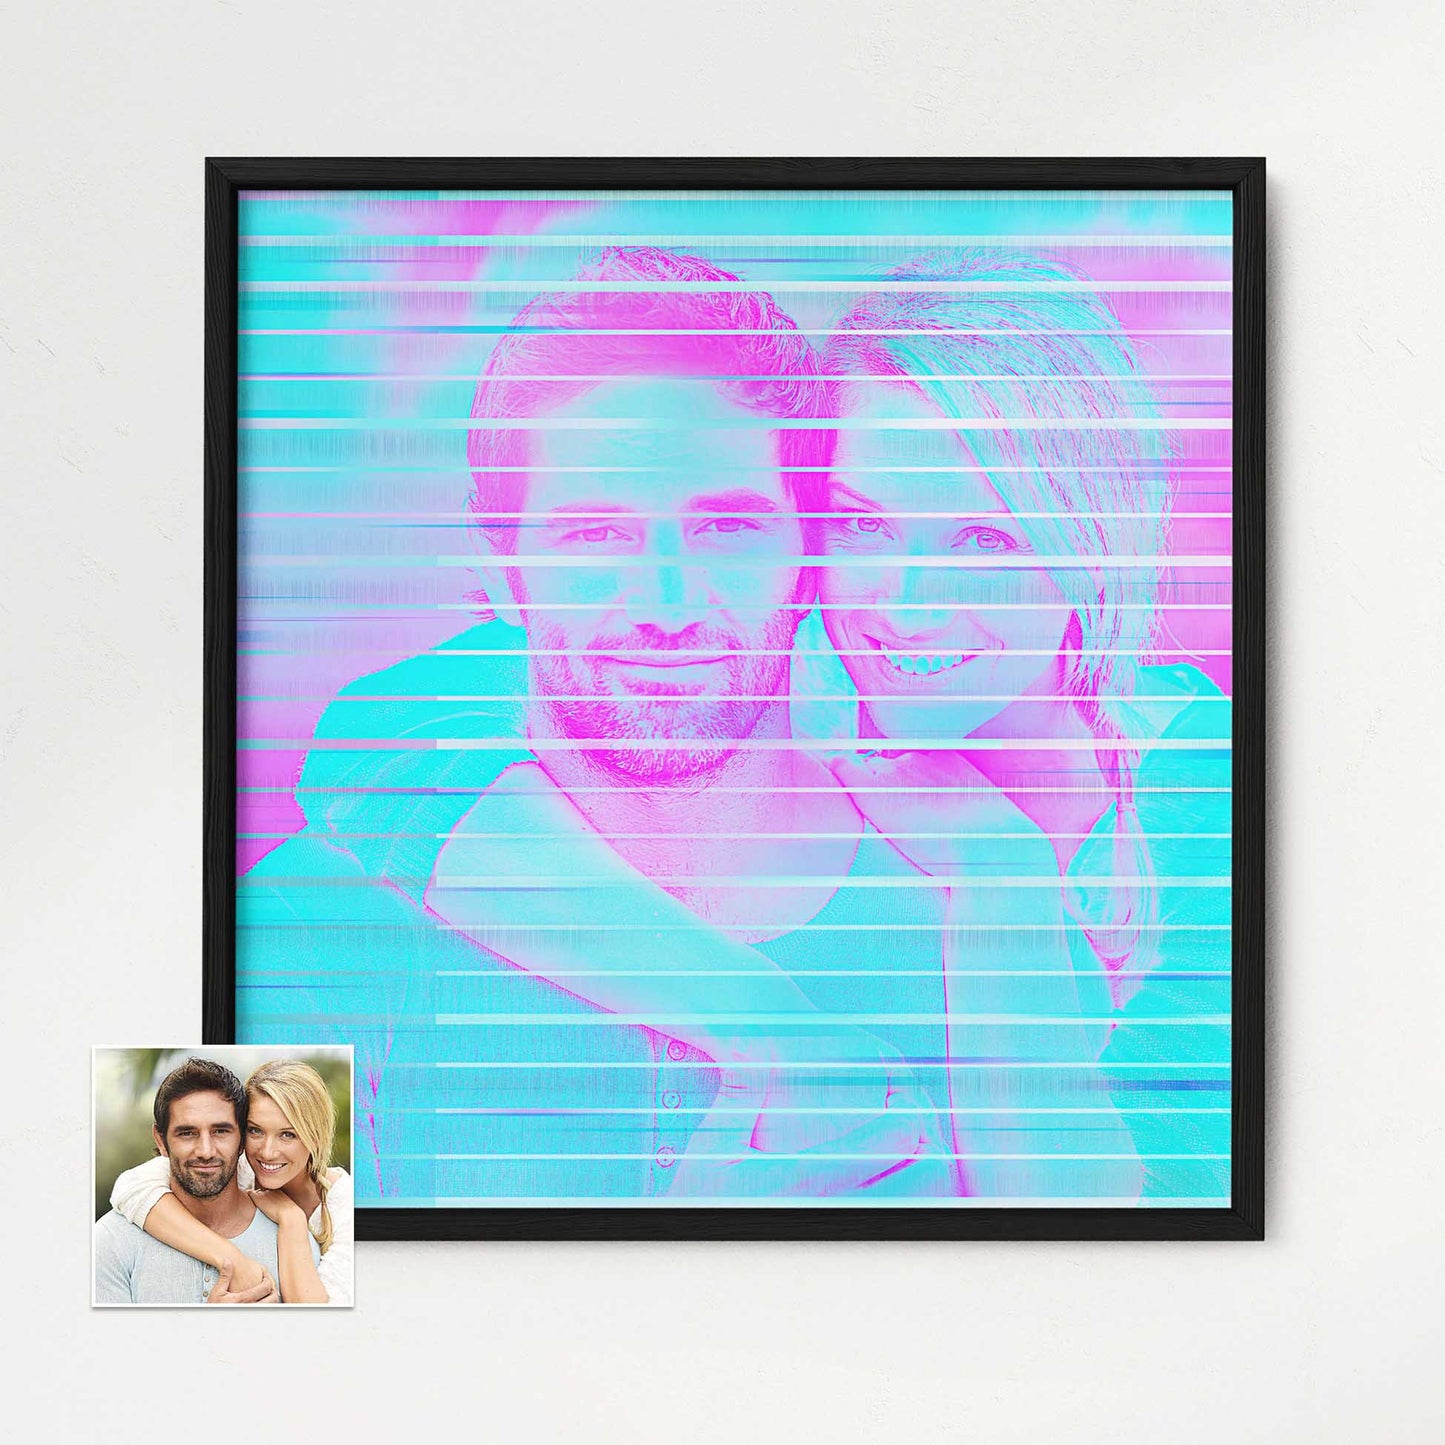 Experience the beauty of our Personalised Purple & Blue Framed Print. The vibrant colors and captivating image create a gallery-quality artwork that is both unique and stunning. With its wooden frame and chic design